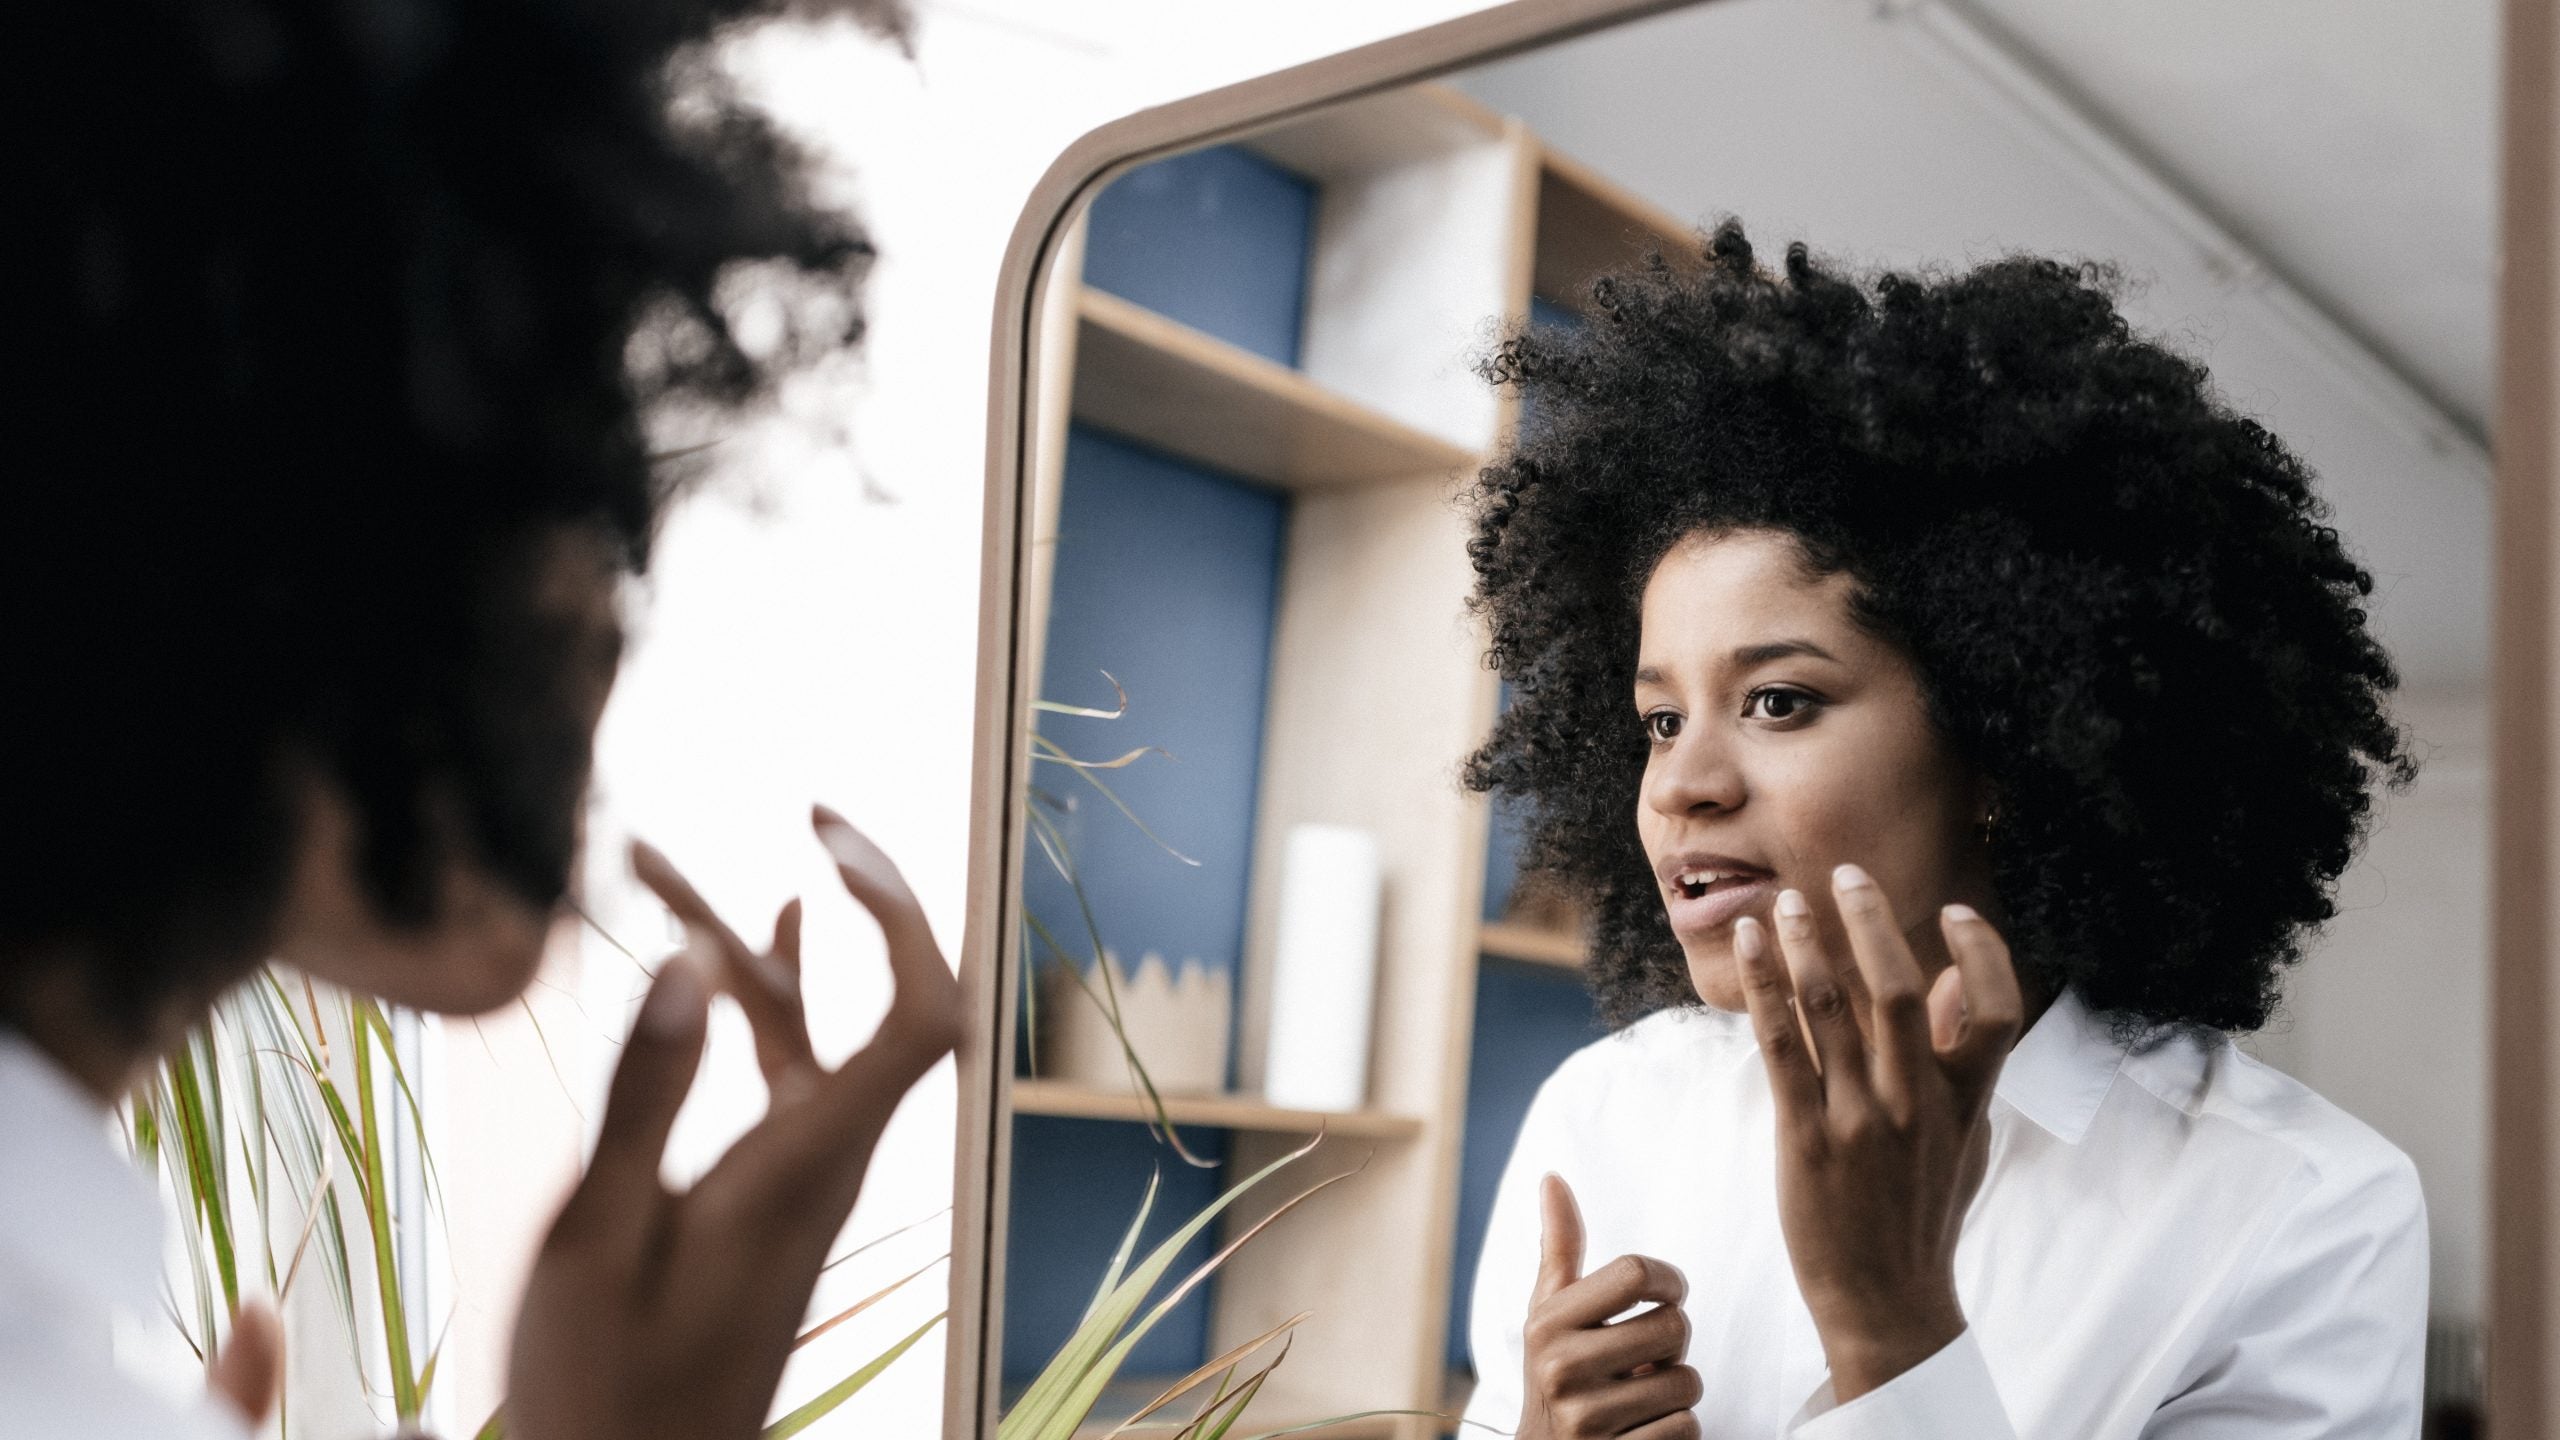 A Guide To Retinol Creams For Black Skin—According To An Expert